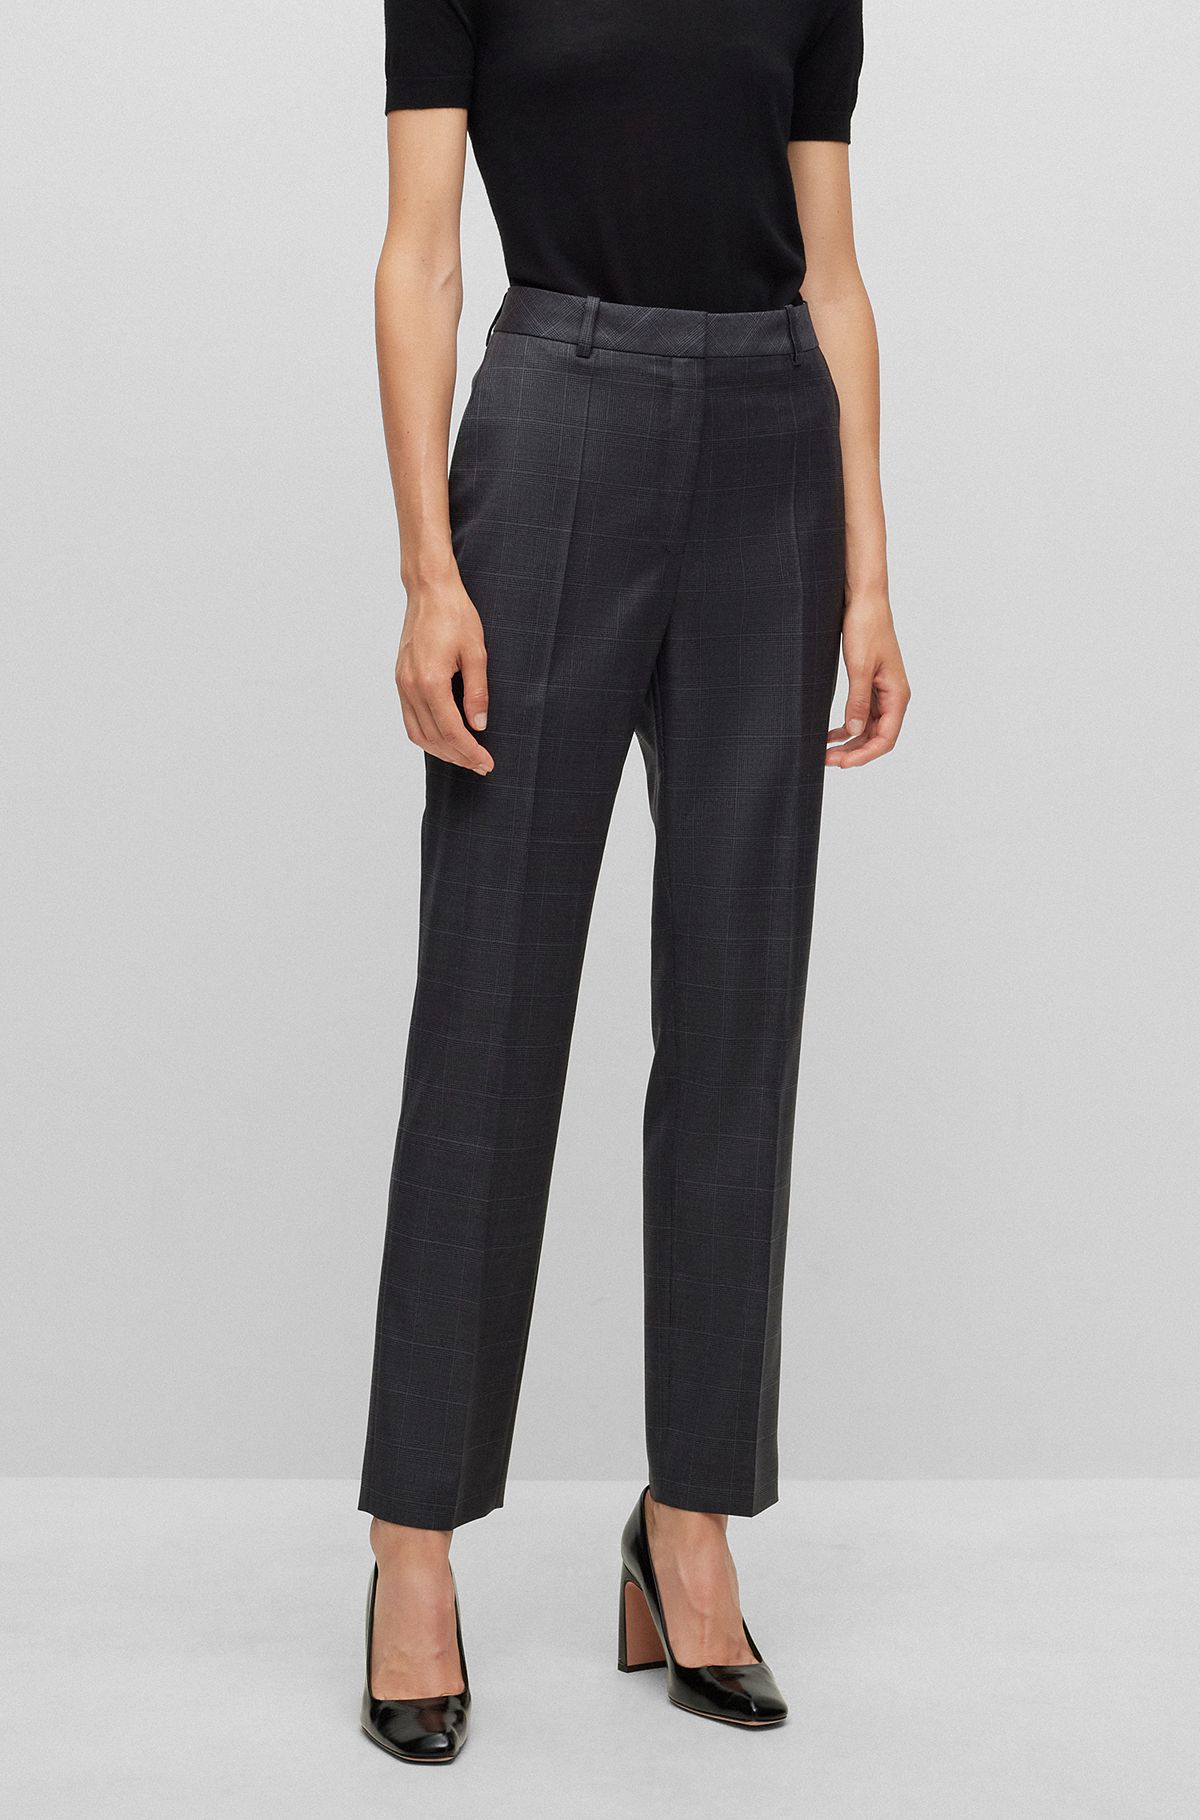 Regular-fit trousers in checked virgin wool, Patterned